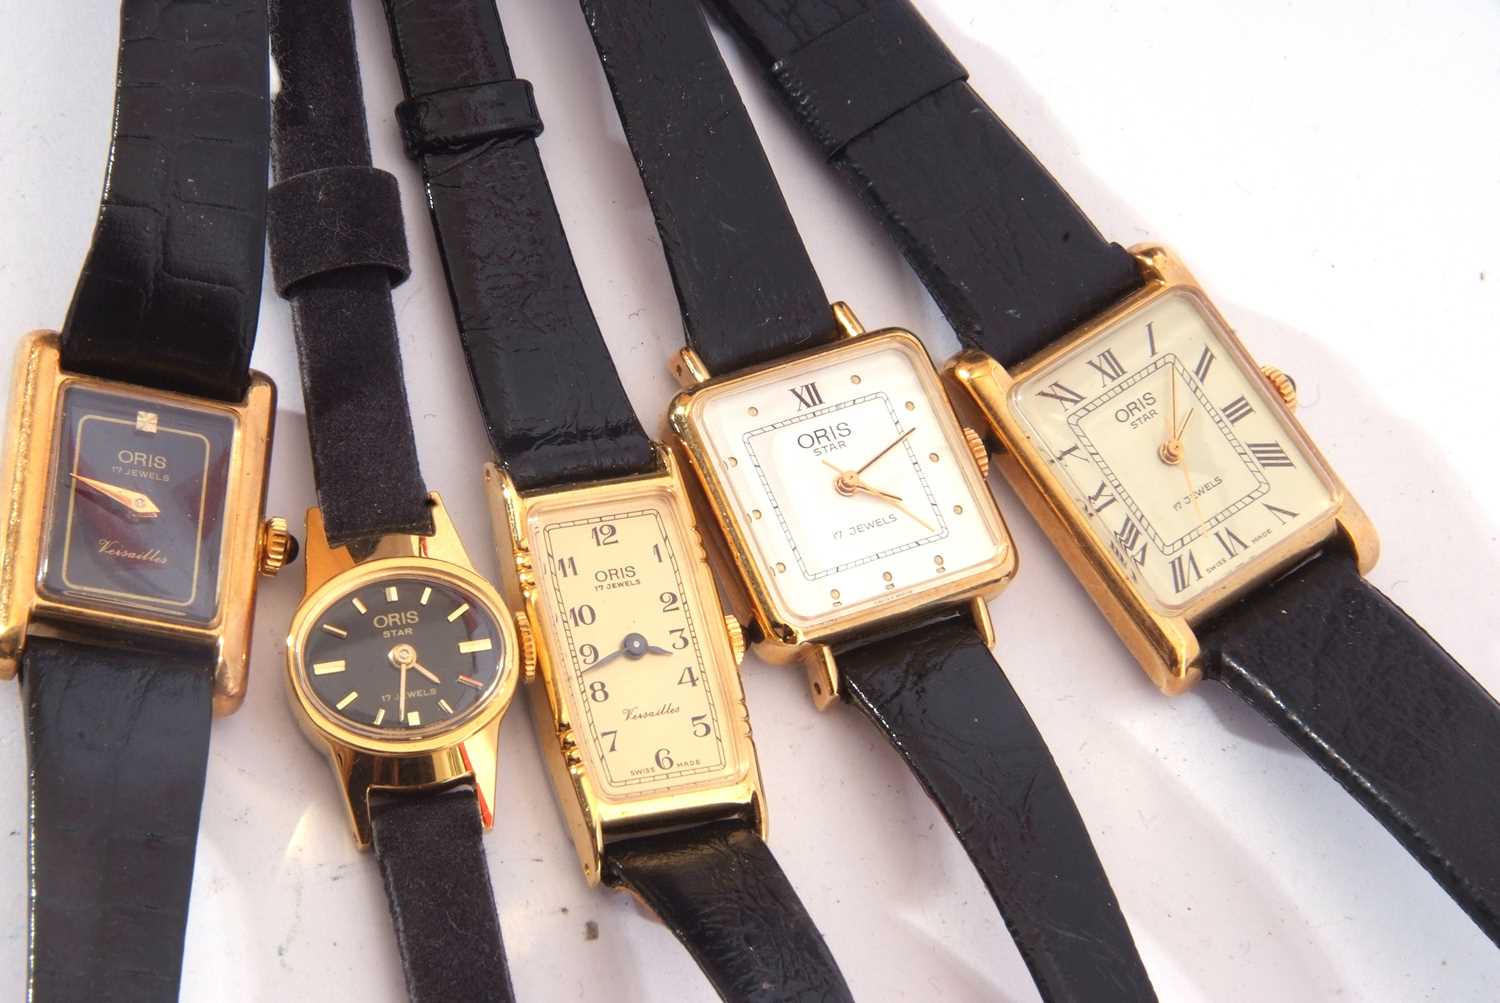 Five ladies Oris wrist watches, all with gold plated and stainless steel cases, all having 17-